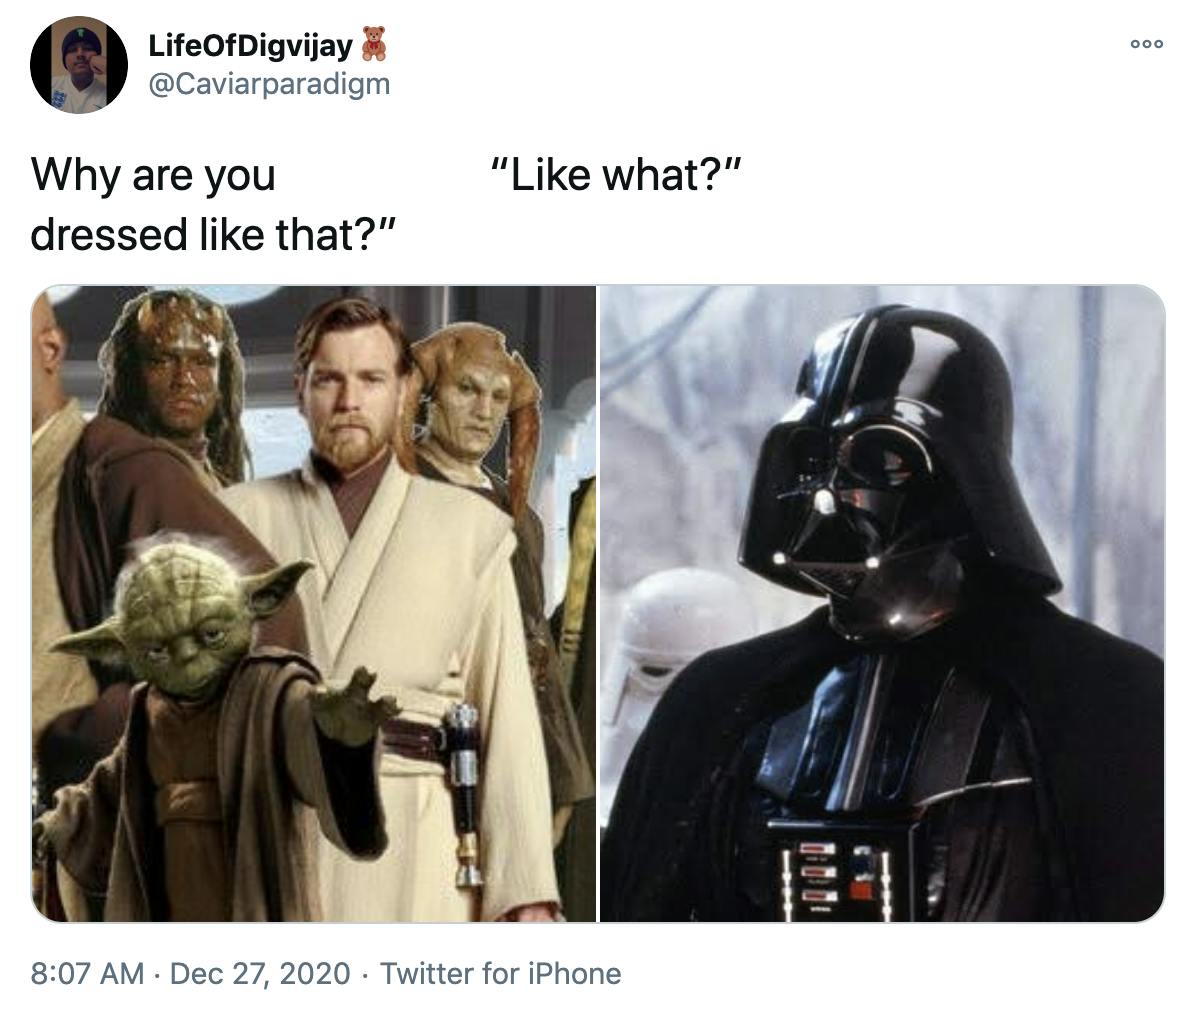 'Why are you dressed like that?' “Like what?” a still of the Jedi councillor from one of the Star Wars prequels with Yoda and Obi Wan Kenobi, wearing cream robed and with short brown hair and a beard, front and centre, next to a still of Darth Vader